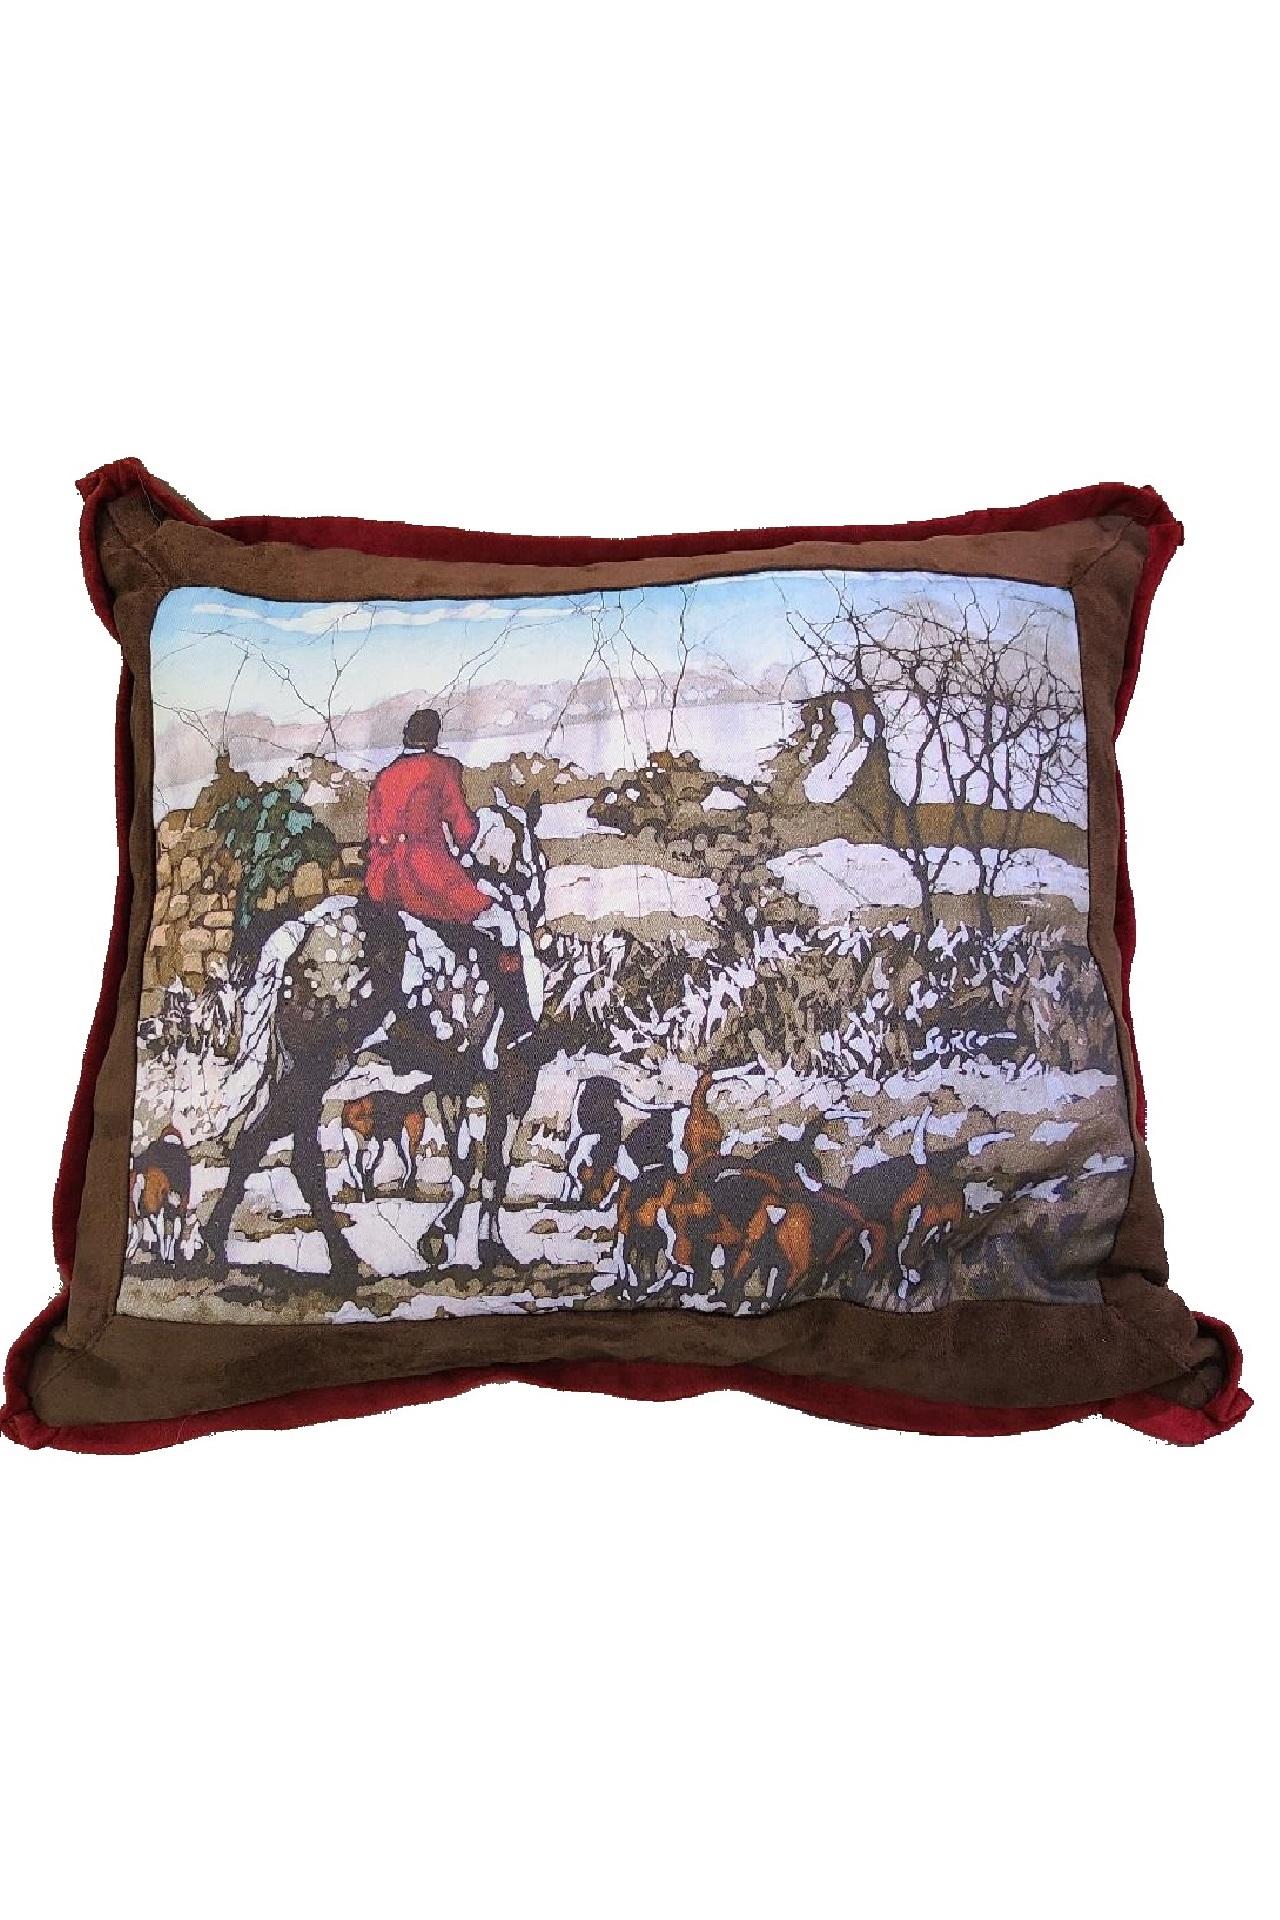 Foxhunt Pillow Cover English Decor Foxhunting Gift Classic Home Decor  Tapestry Cushion 18x18 Horses and Beagles 